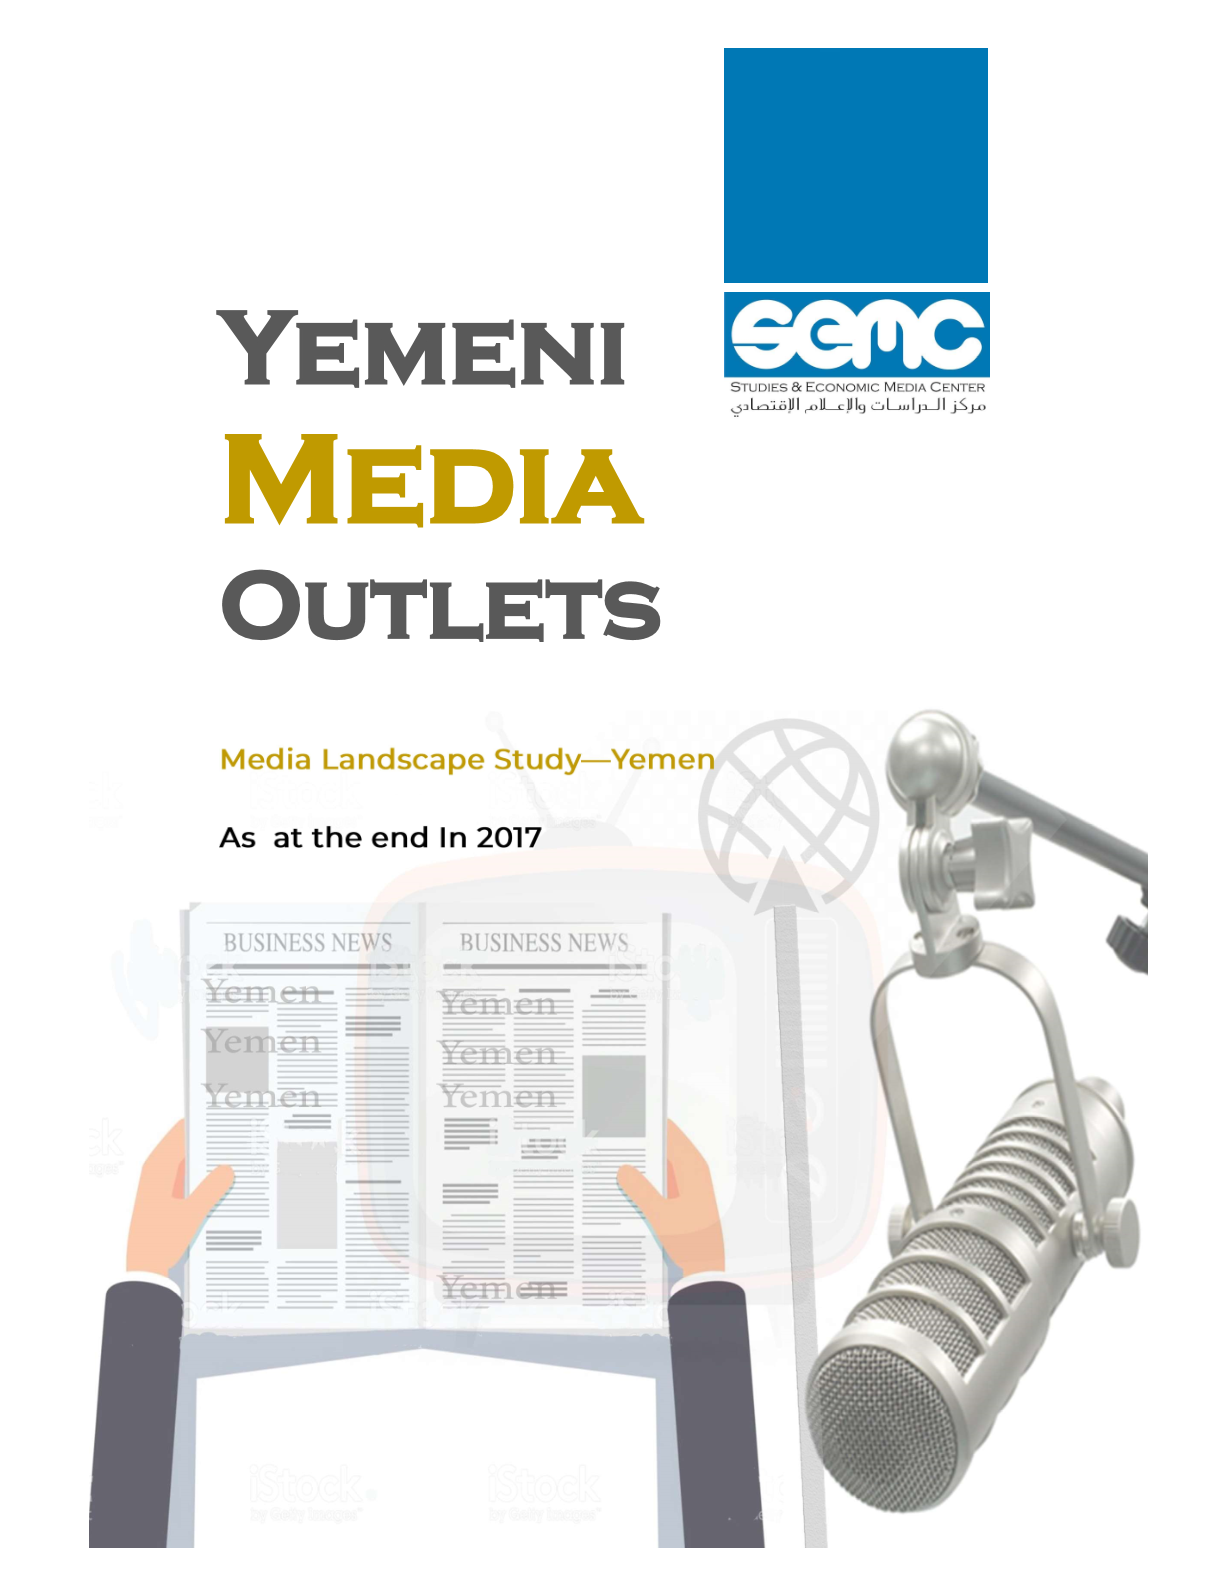 In A New Report issued by SEMC: More than 50 % of Yemeni TV channels broadcasting from outside Yemen.